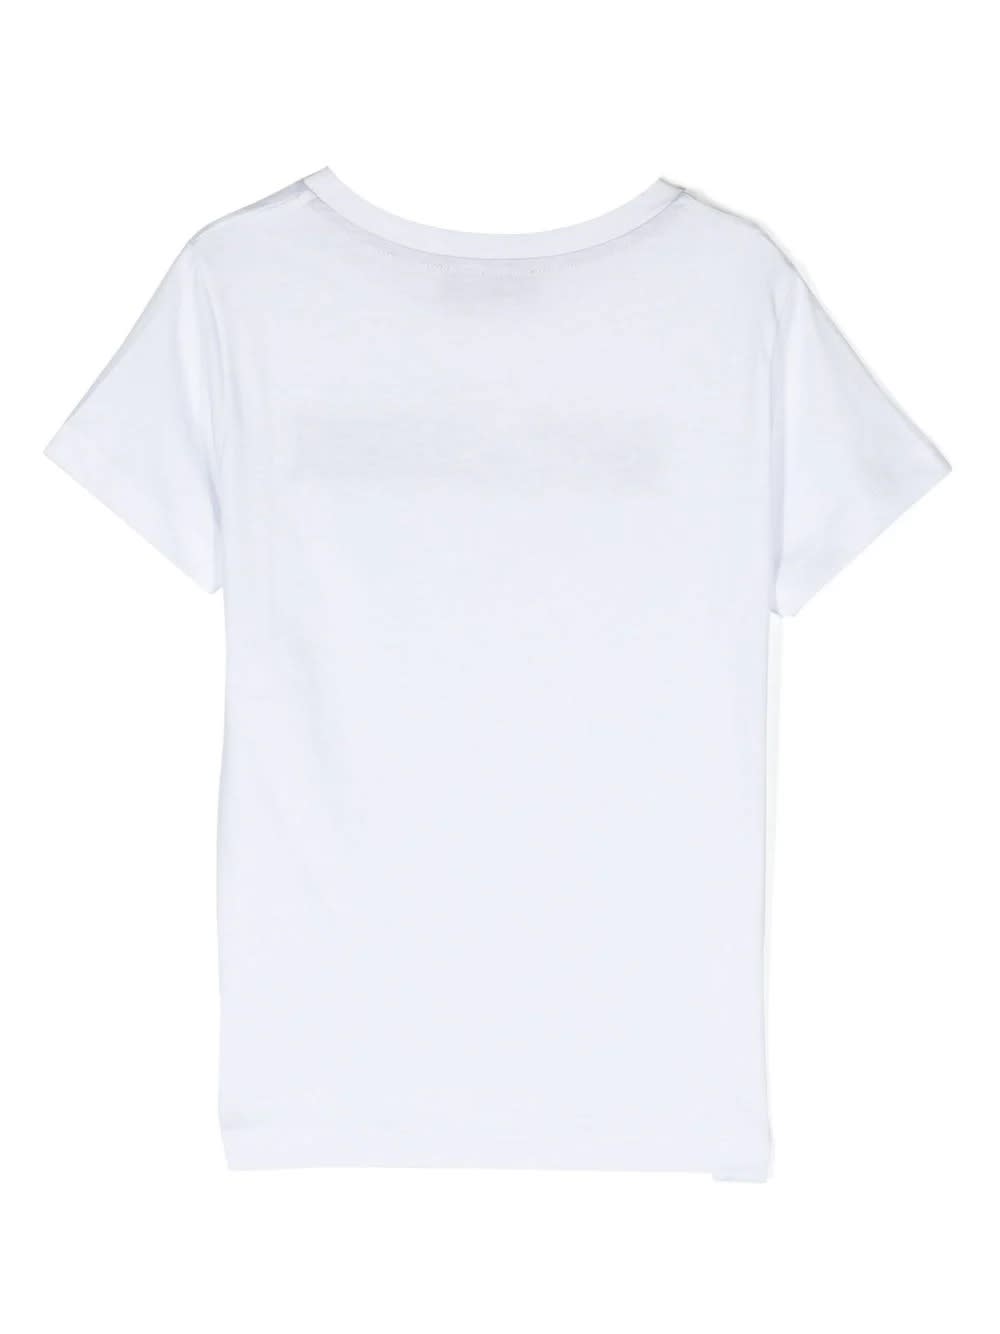 Shop Missoni White T-shirt With Black Logo In C